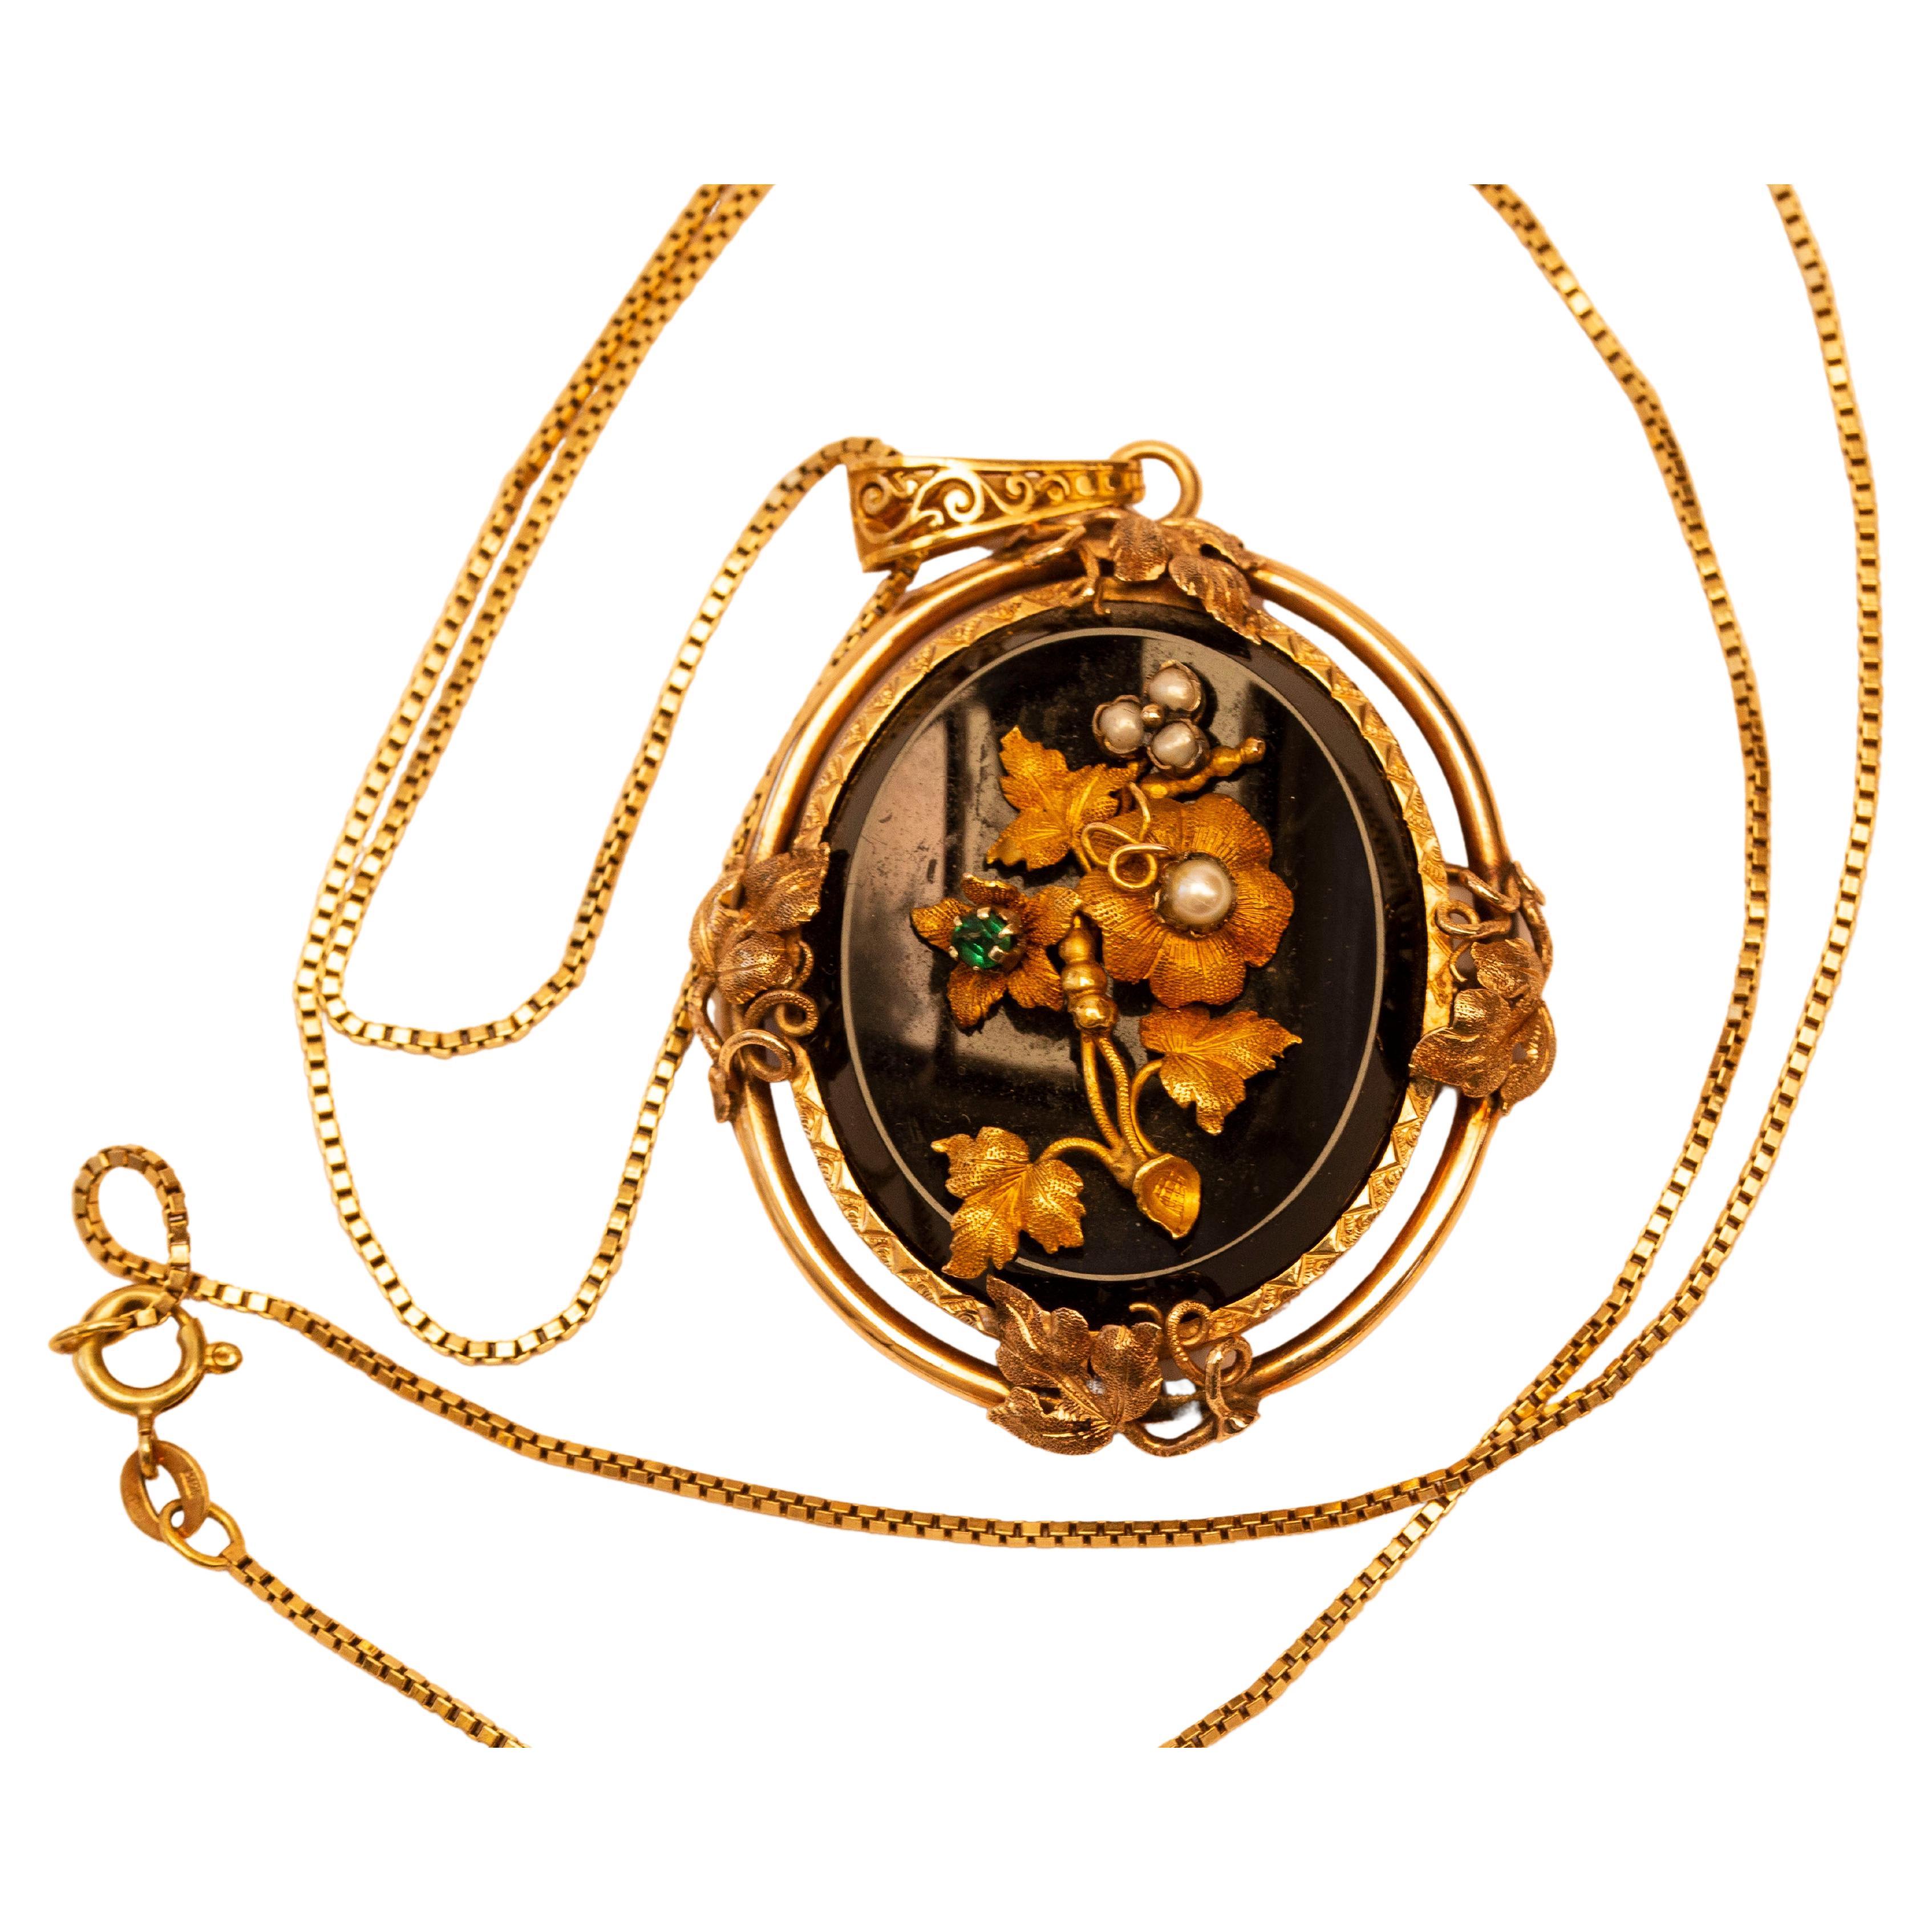 Antique 14 Karat Oval Onyx Pendant with Floral Emerald Pearl & Gold Decoration  For Sale